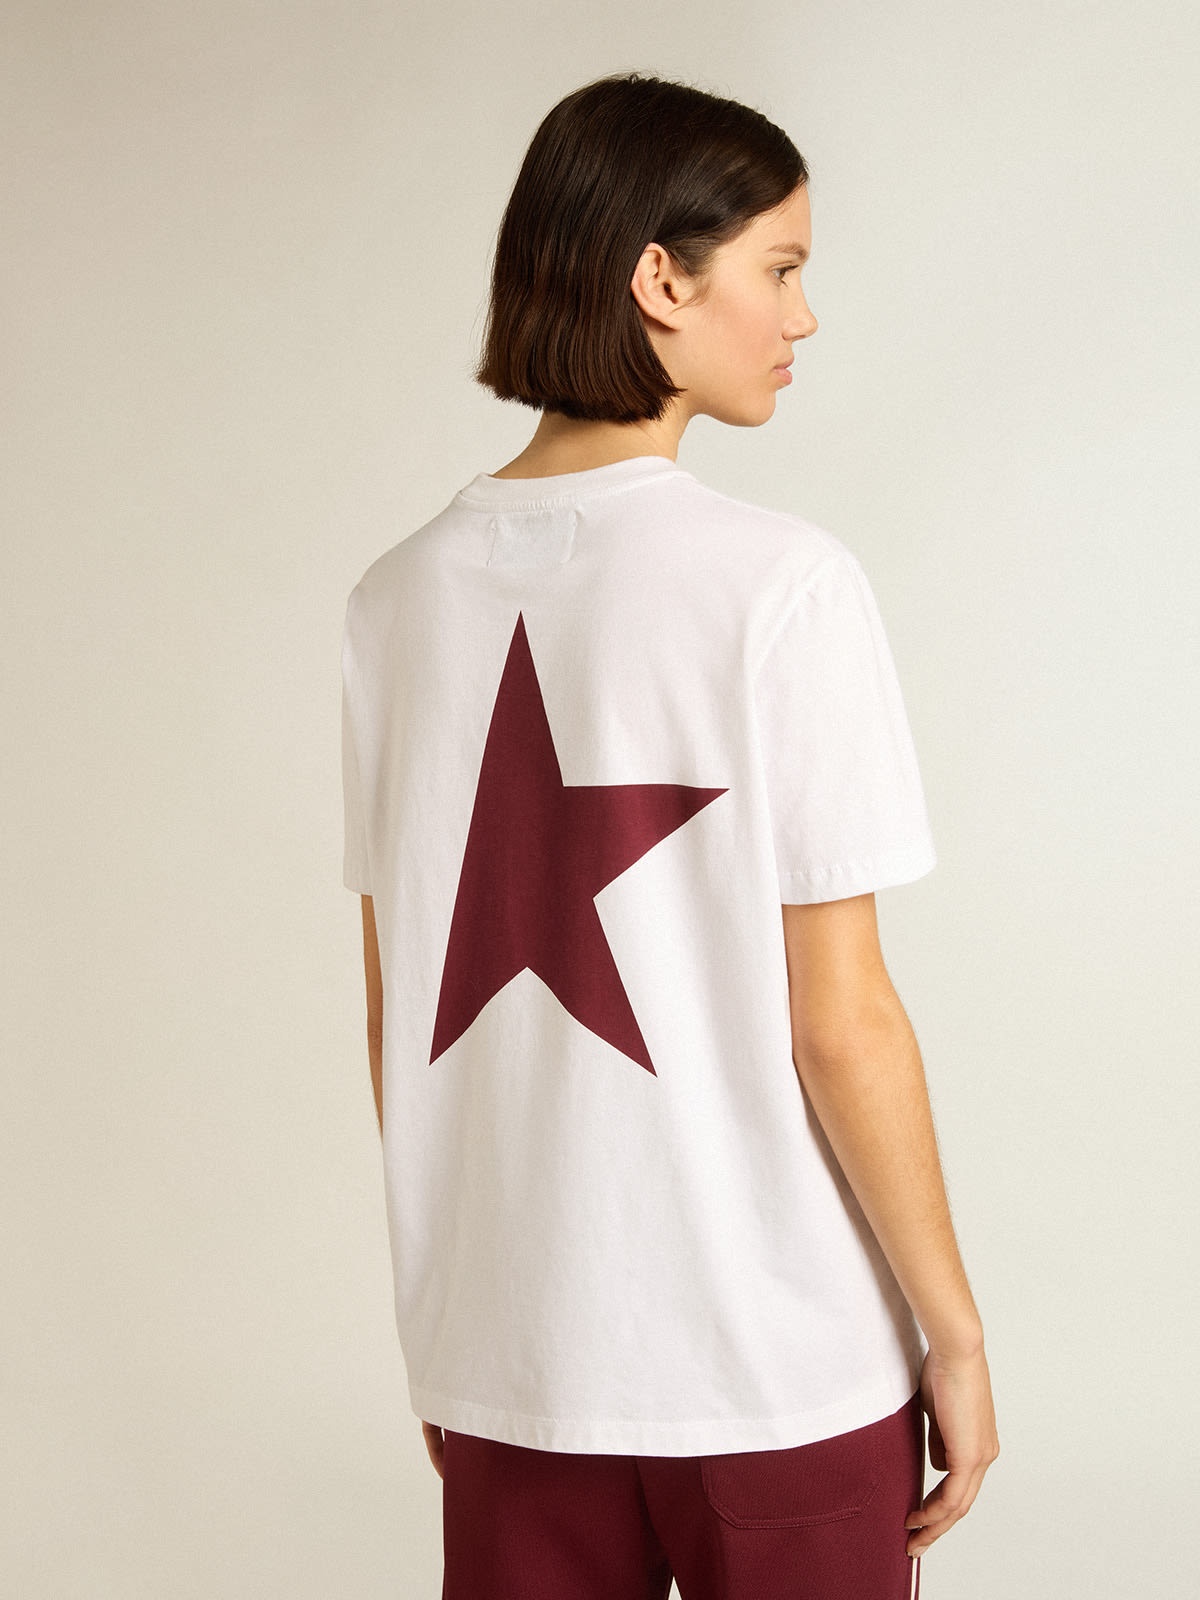 Women’s white T-shirt with burgundy star on the front - 4